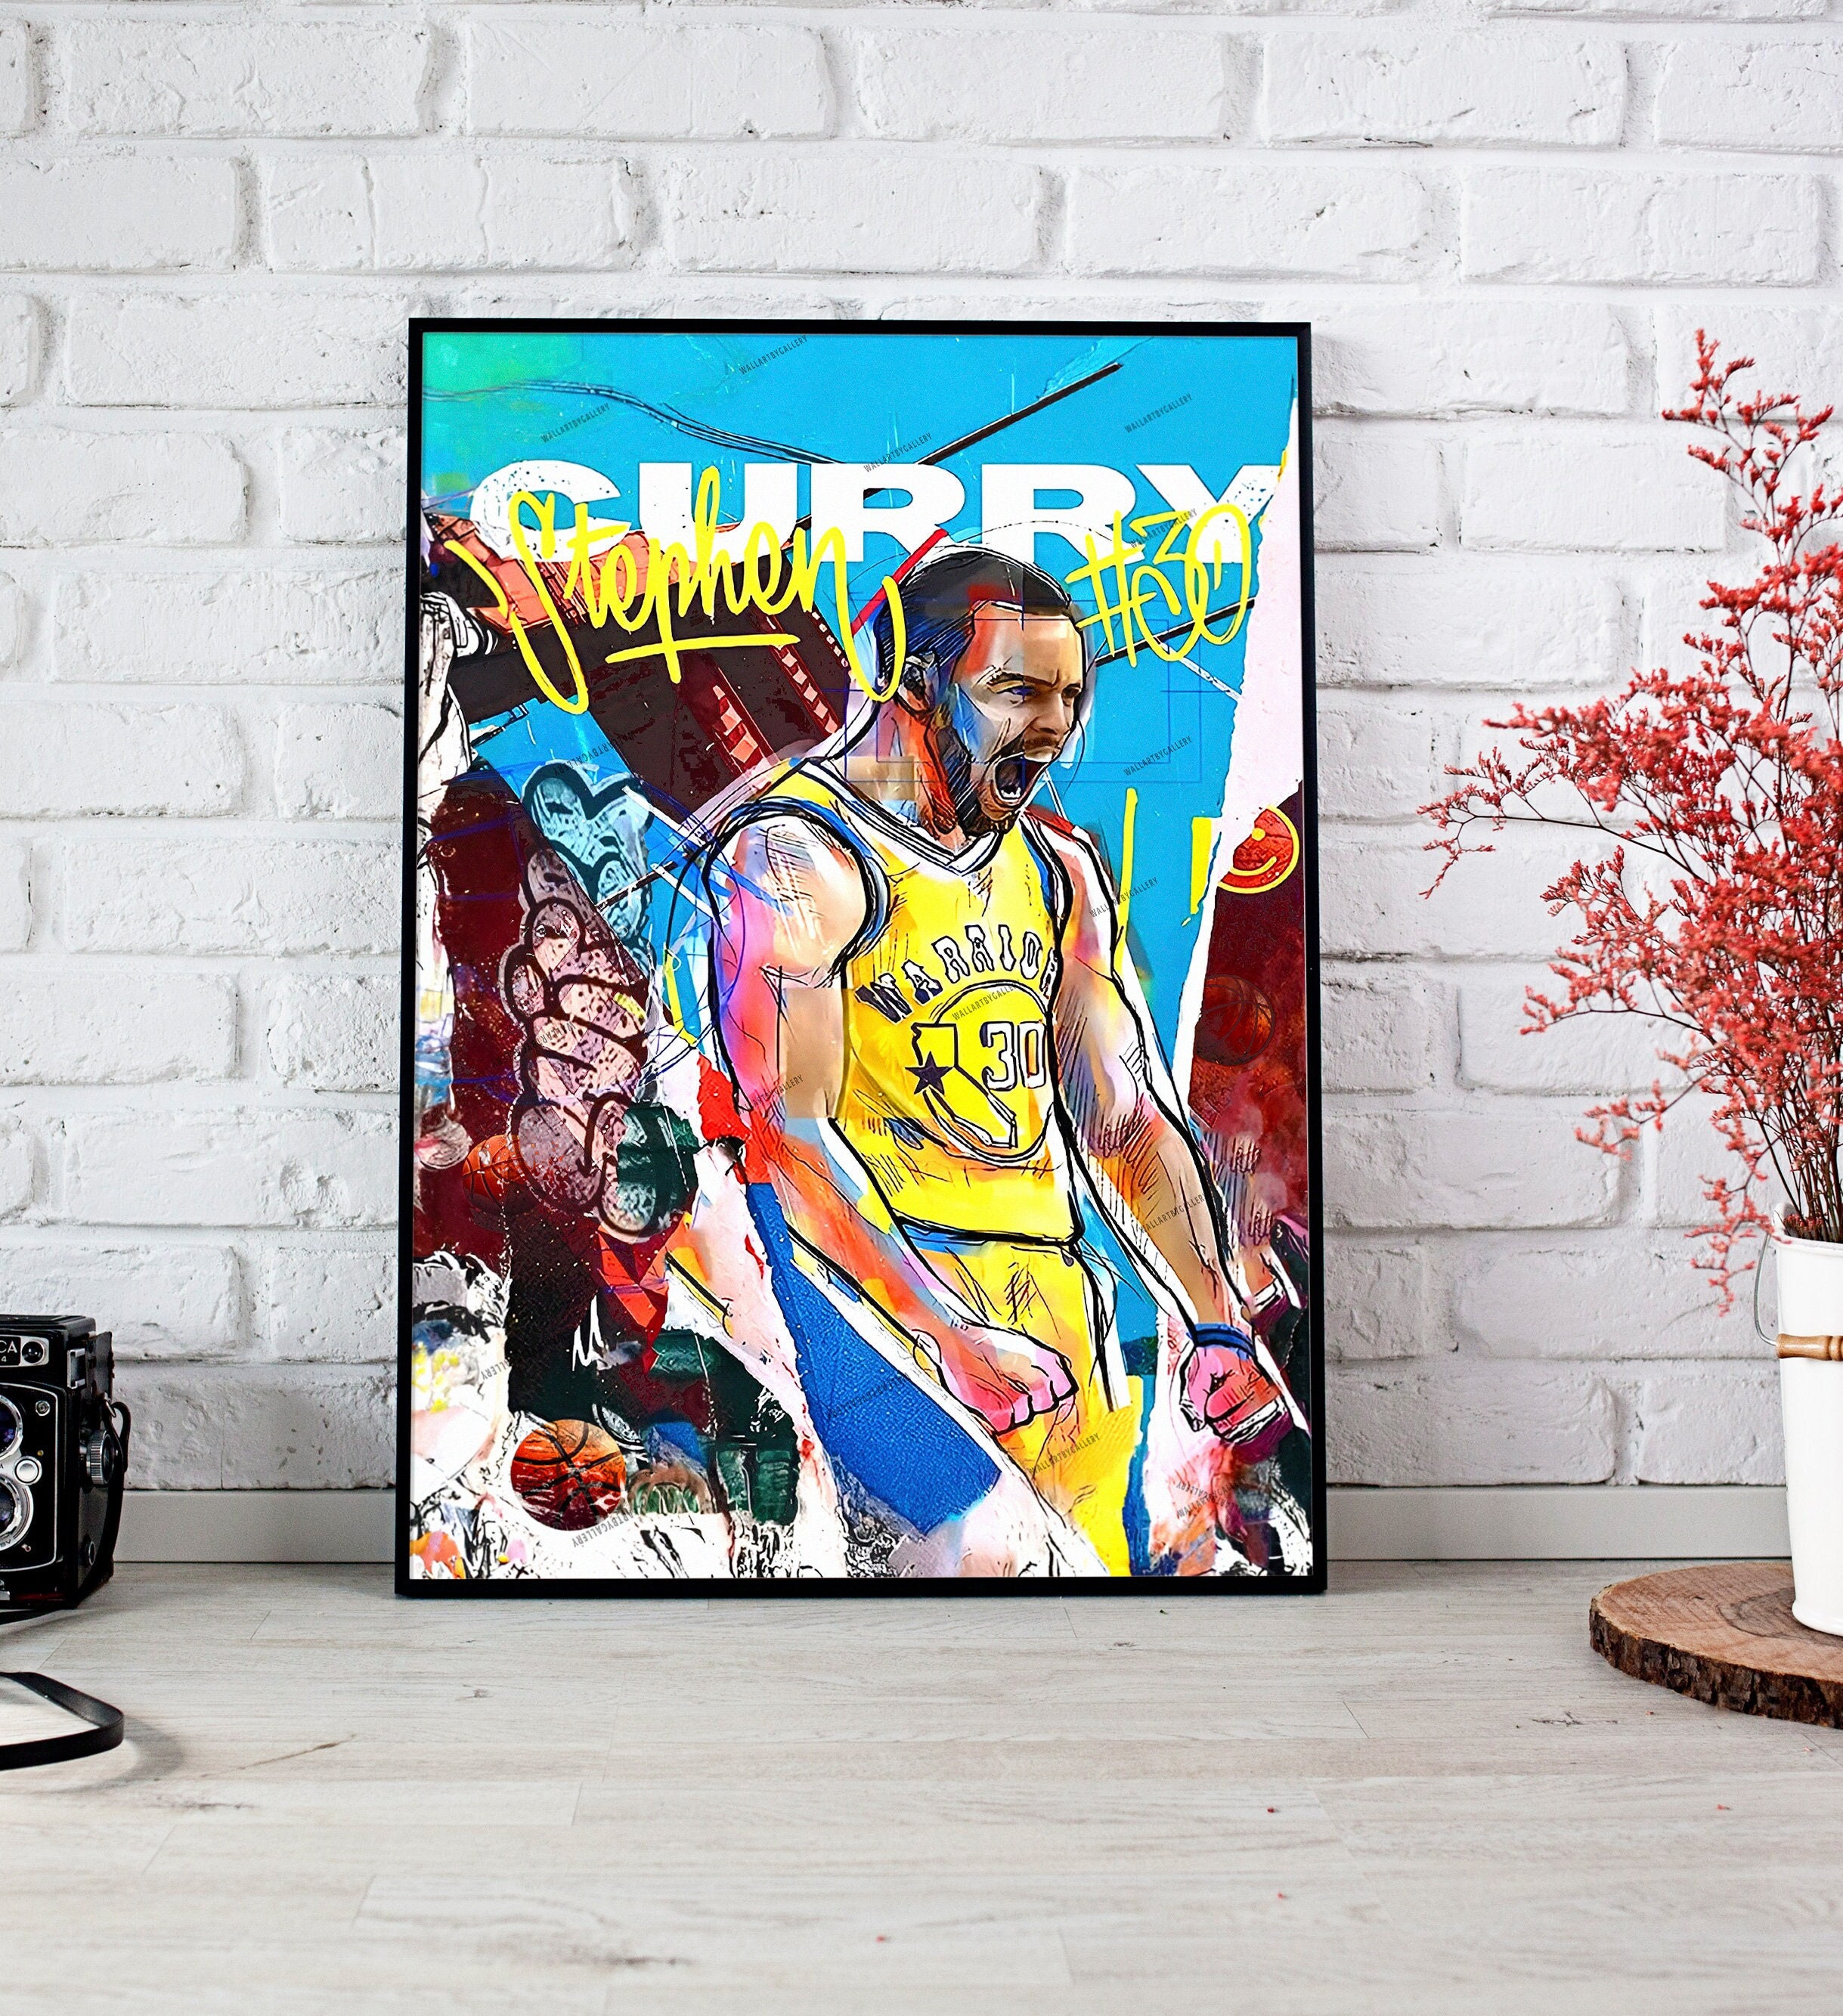 Steph Curry 3-Point Record Jerseys Golden State Warriors 8x10 Framed Photo  with Engraved Autograph